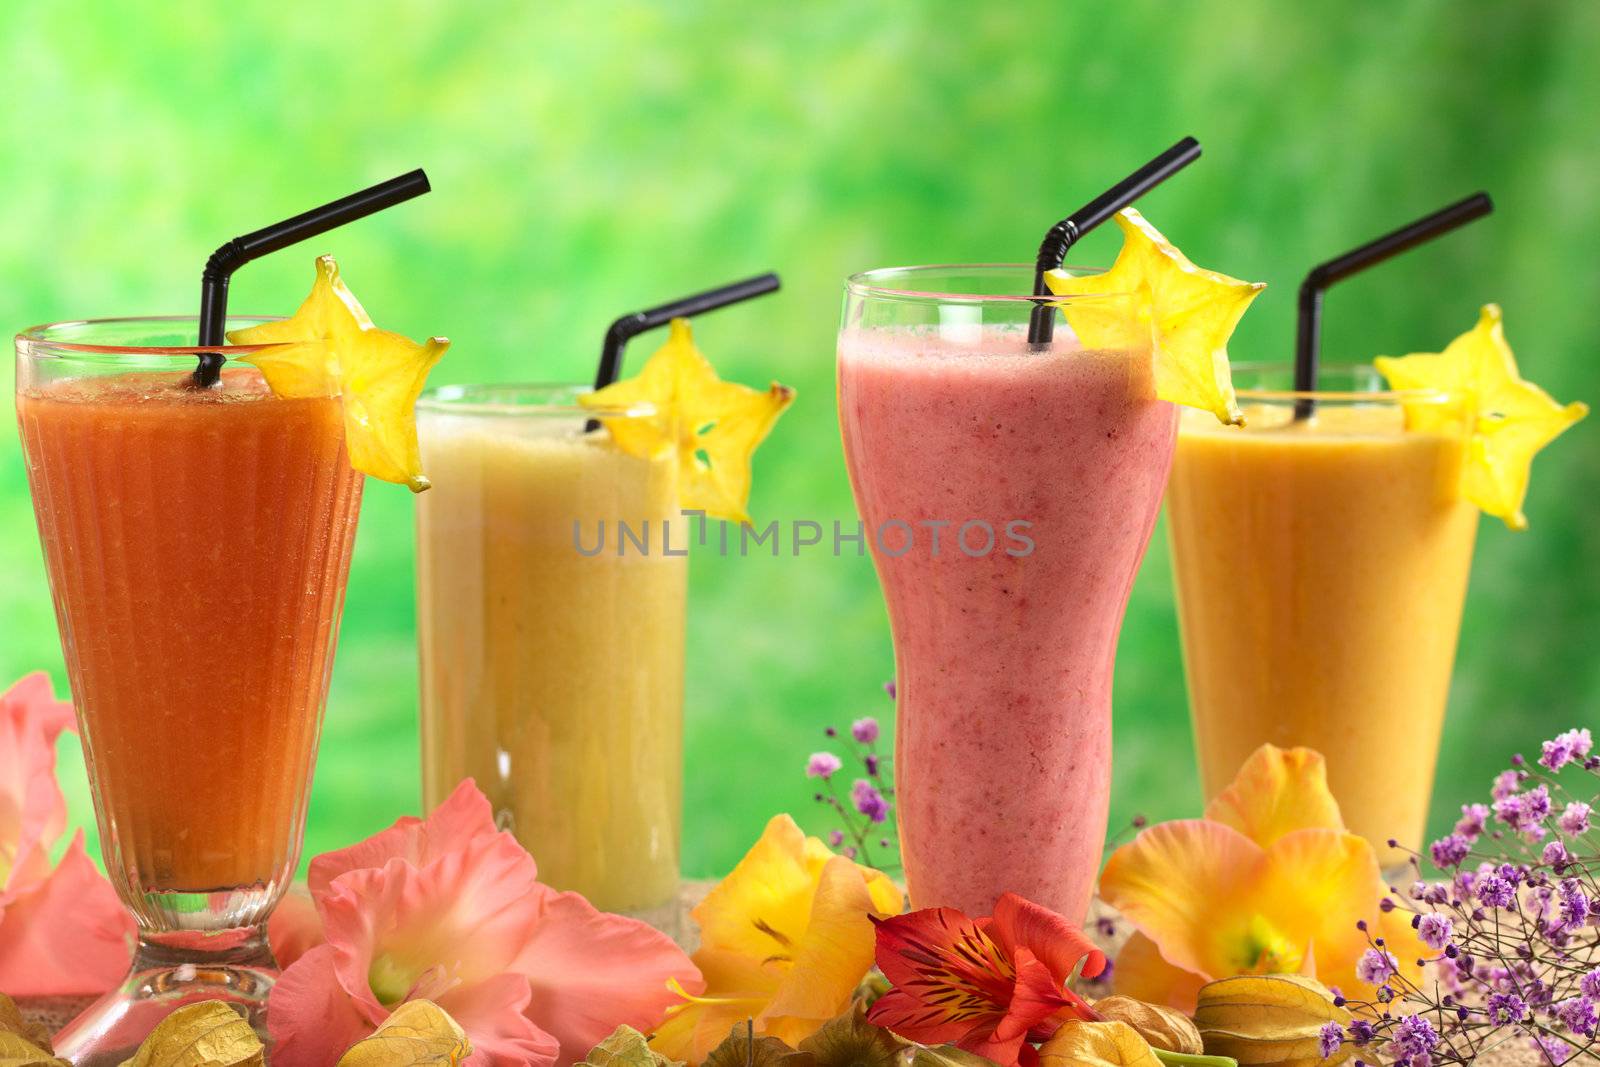 Fresh papaya, strawberry, pineapple and mango fruit juices and milkshakes decorated with flowers (Selective Focus, Focus on the papaya and strawberry juices in the front)